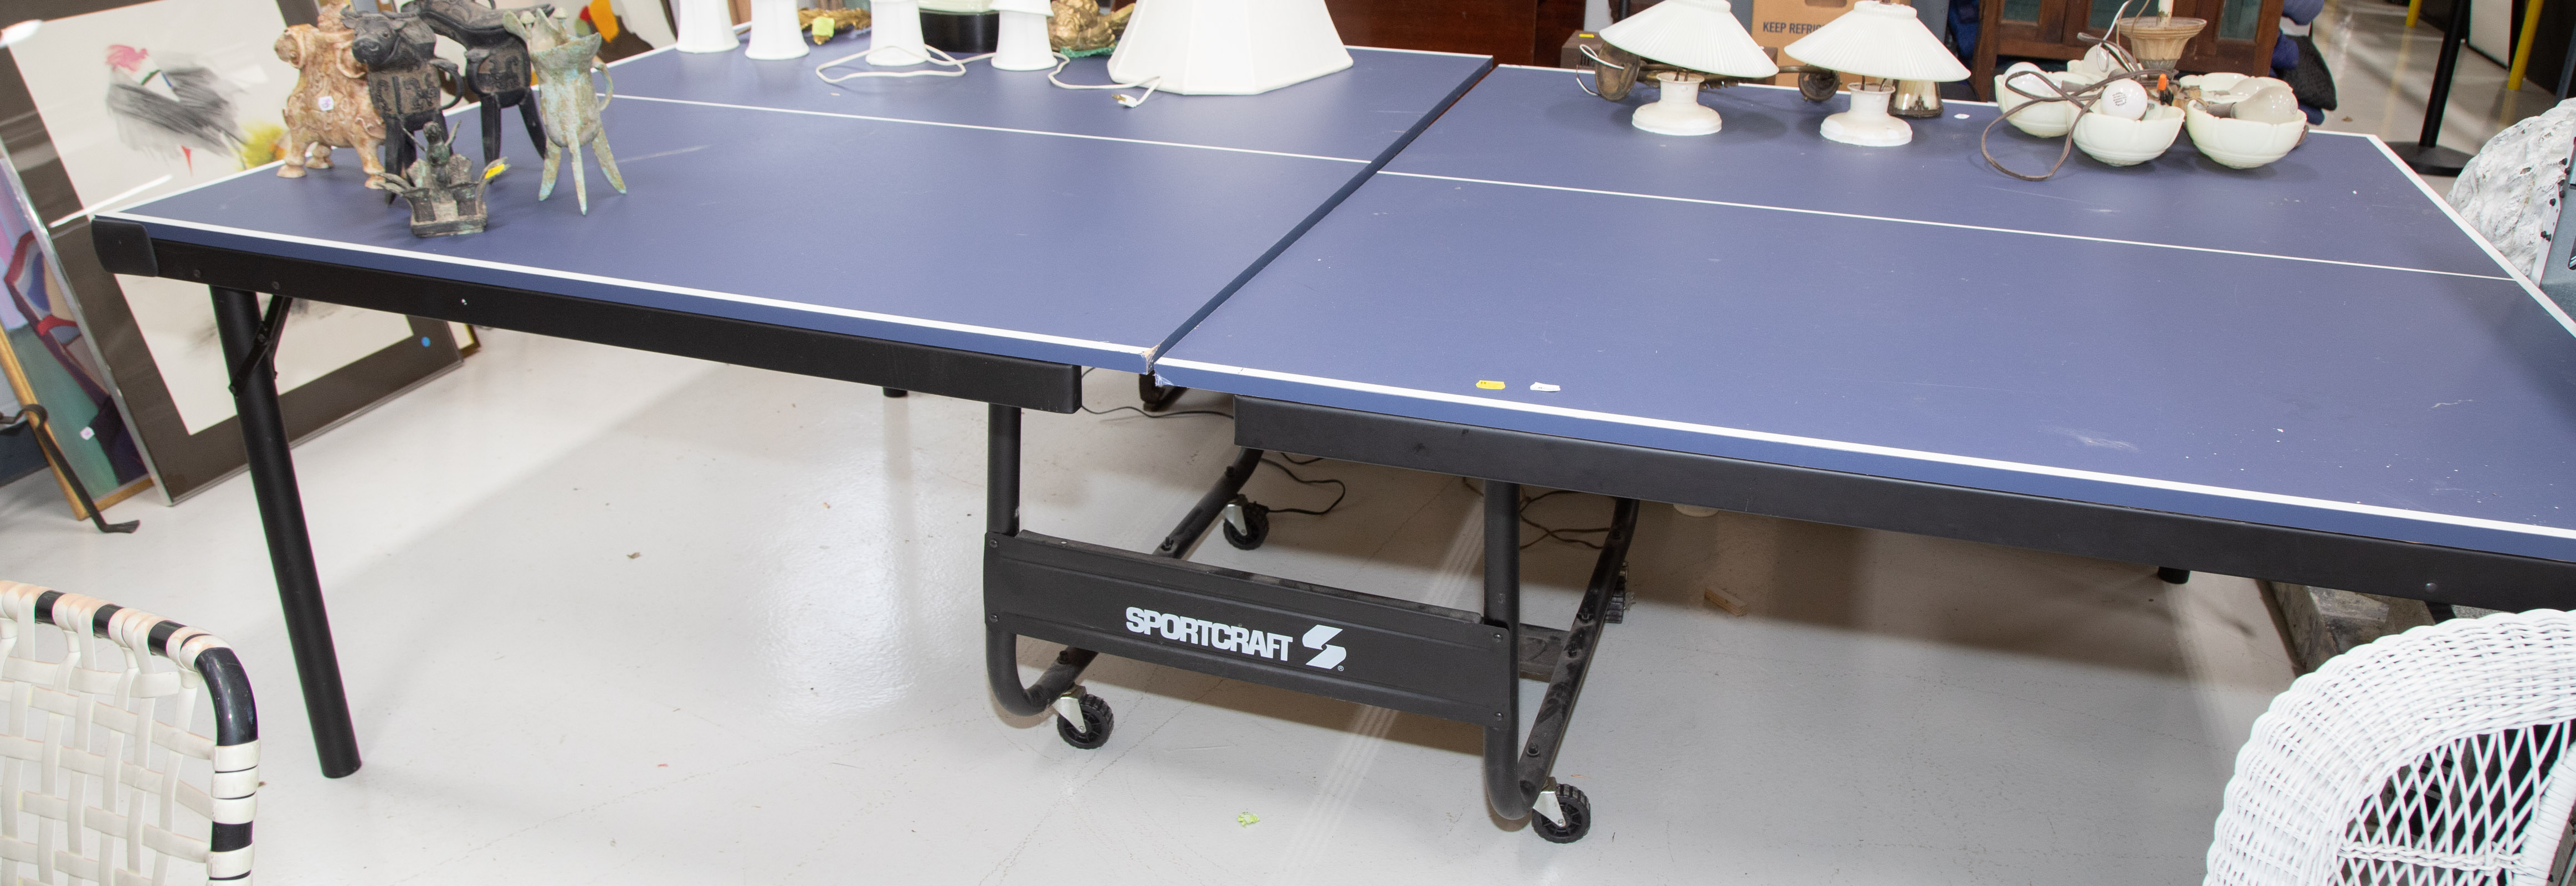 SPORTCRAFT PING PONG TABLE Modern  338af1